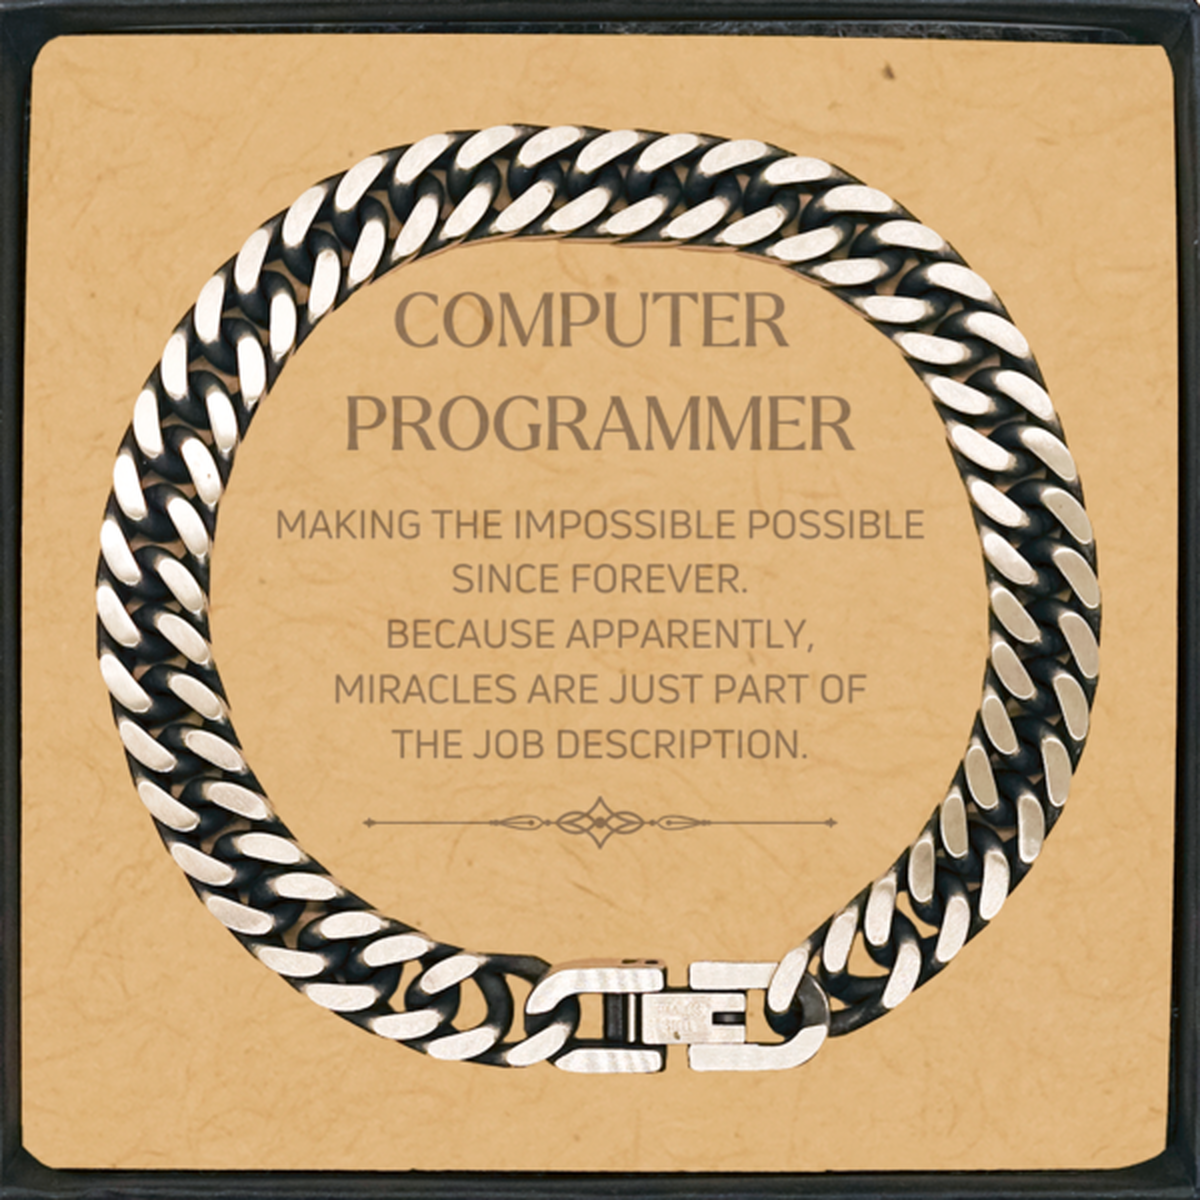 Funny Computer Programmer Gifts, Miracles are just part of the job description, Inspirational Birthday Cuban Link Chain Bracelet For Computer Programmer, Men, Women, Coworkers, Friends, Boss